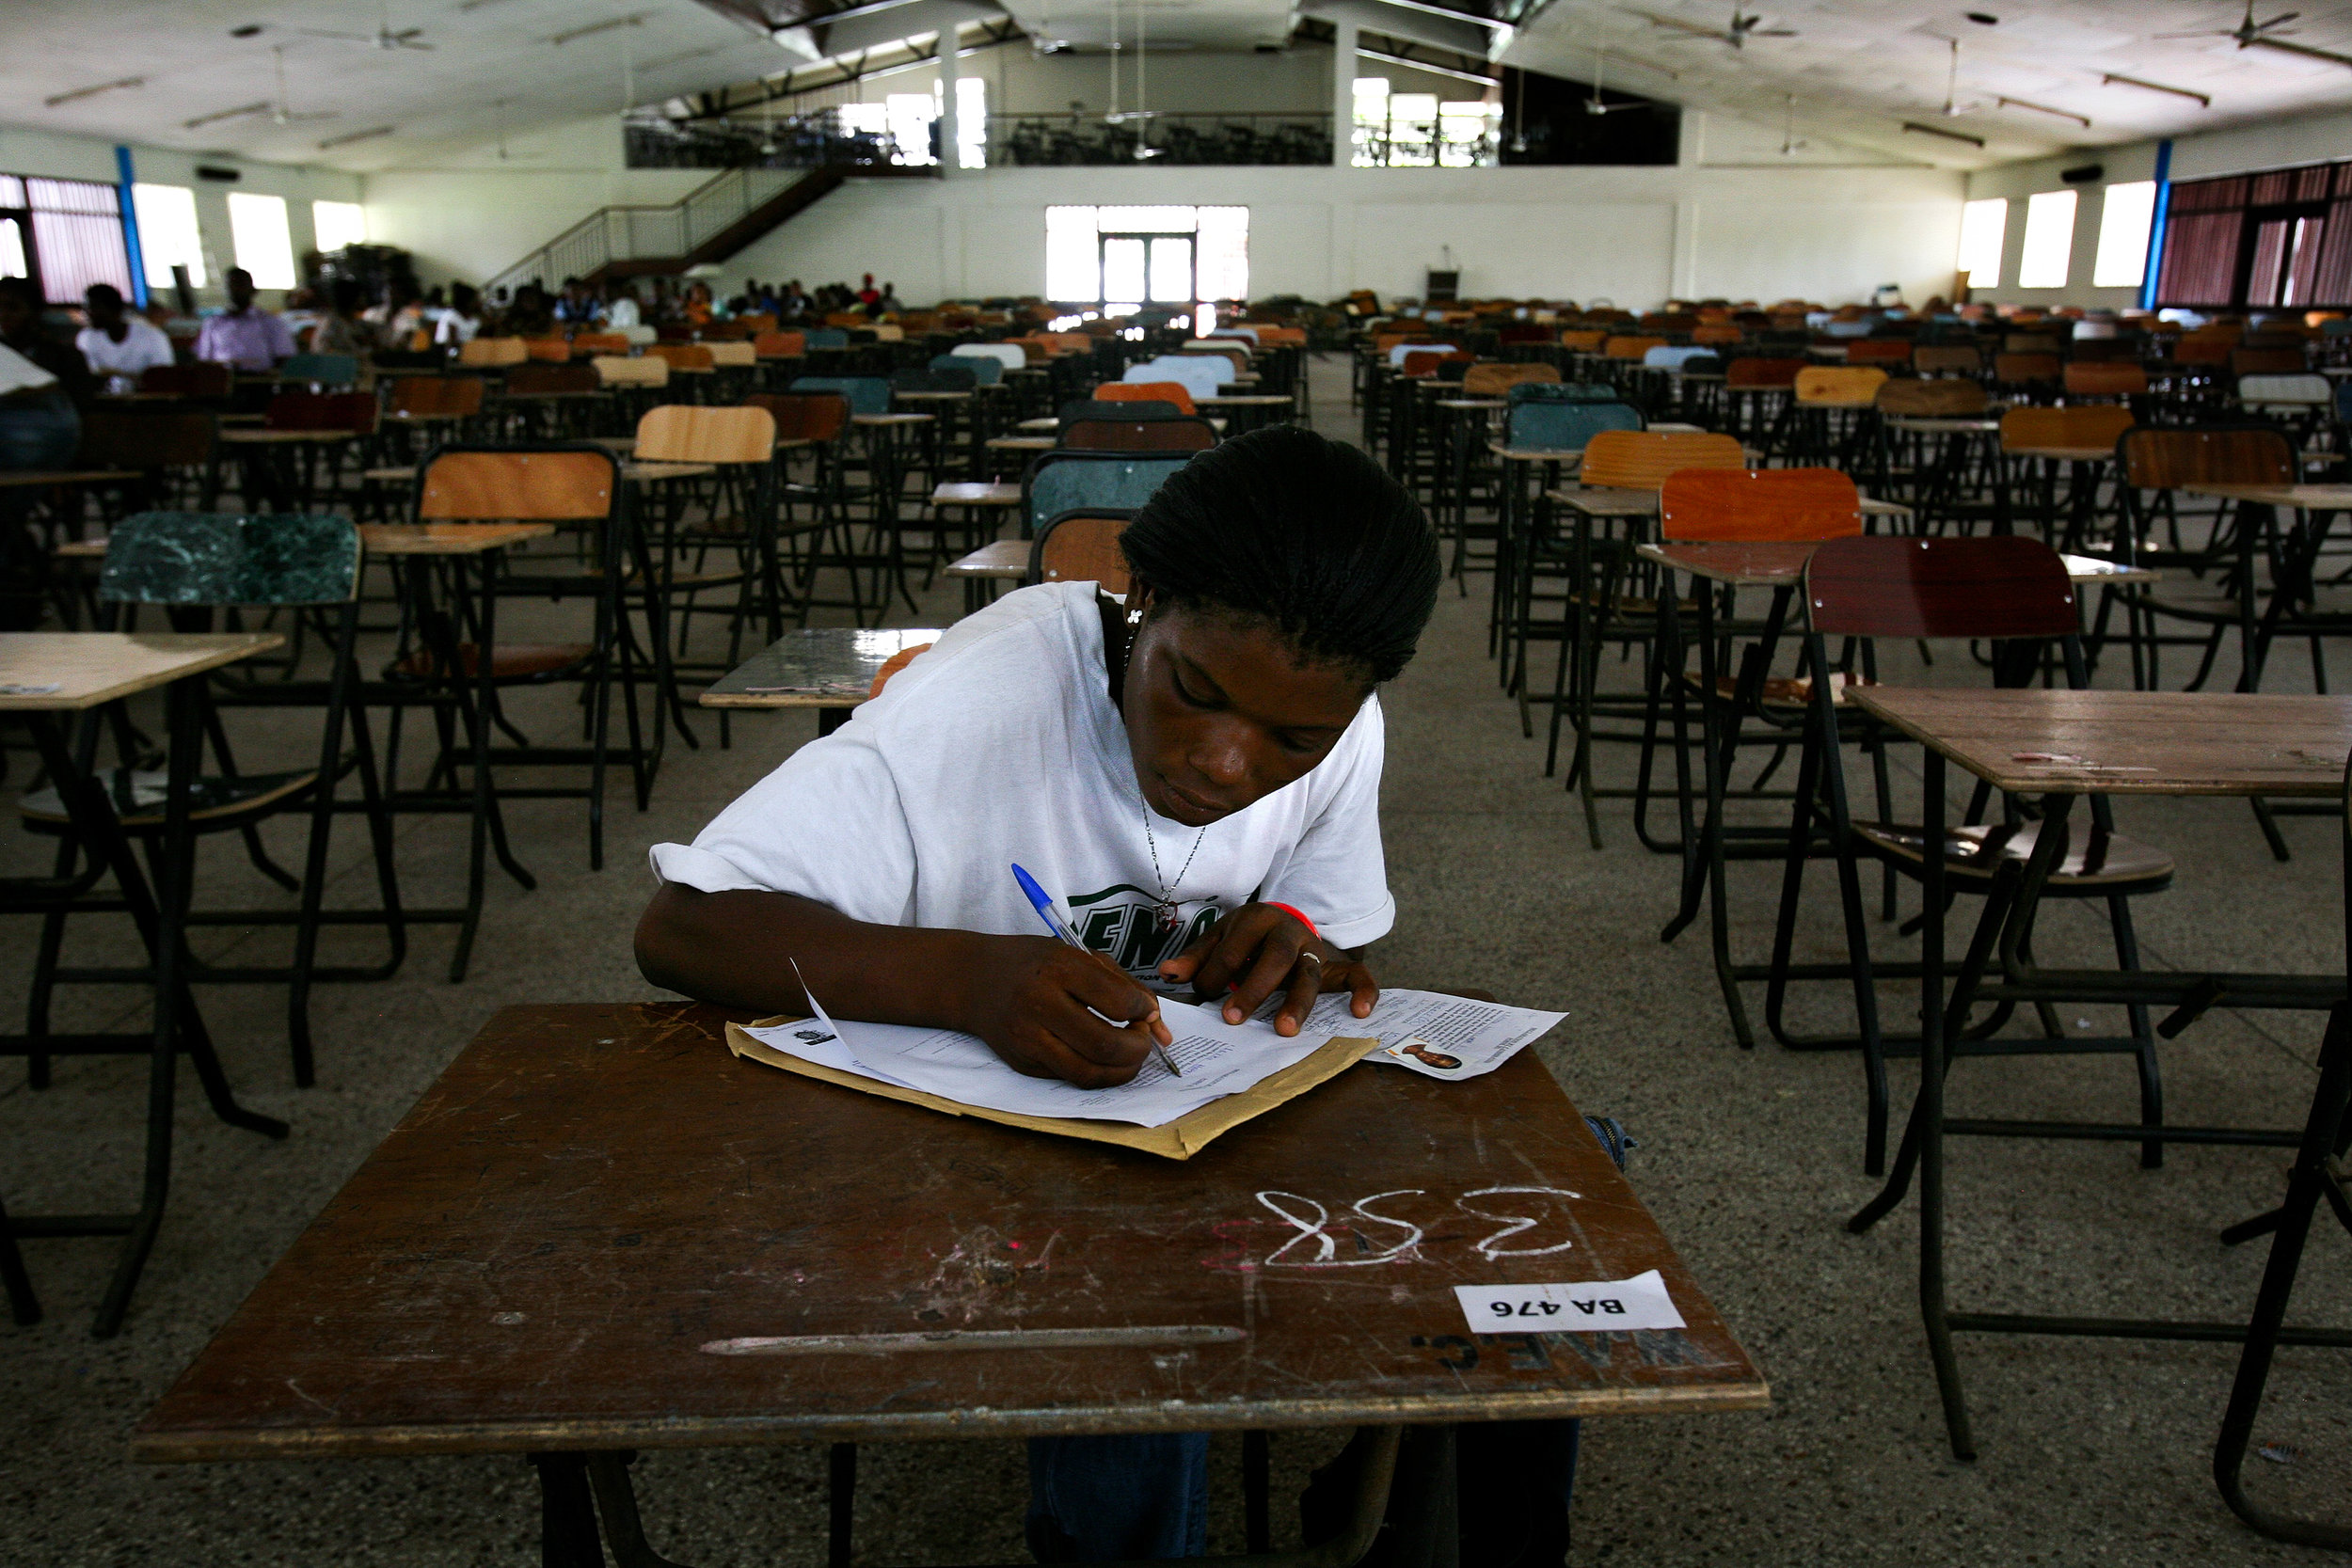  Lamisi  registers for training college entrance exams in Accra, Ghana on March 17, 2009. 